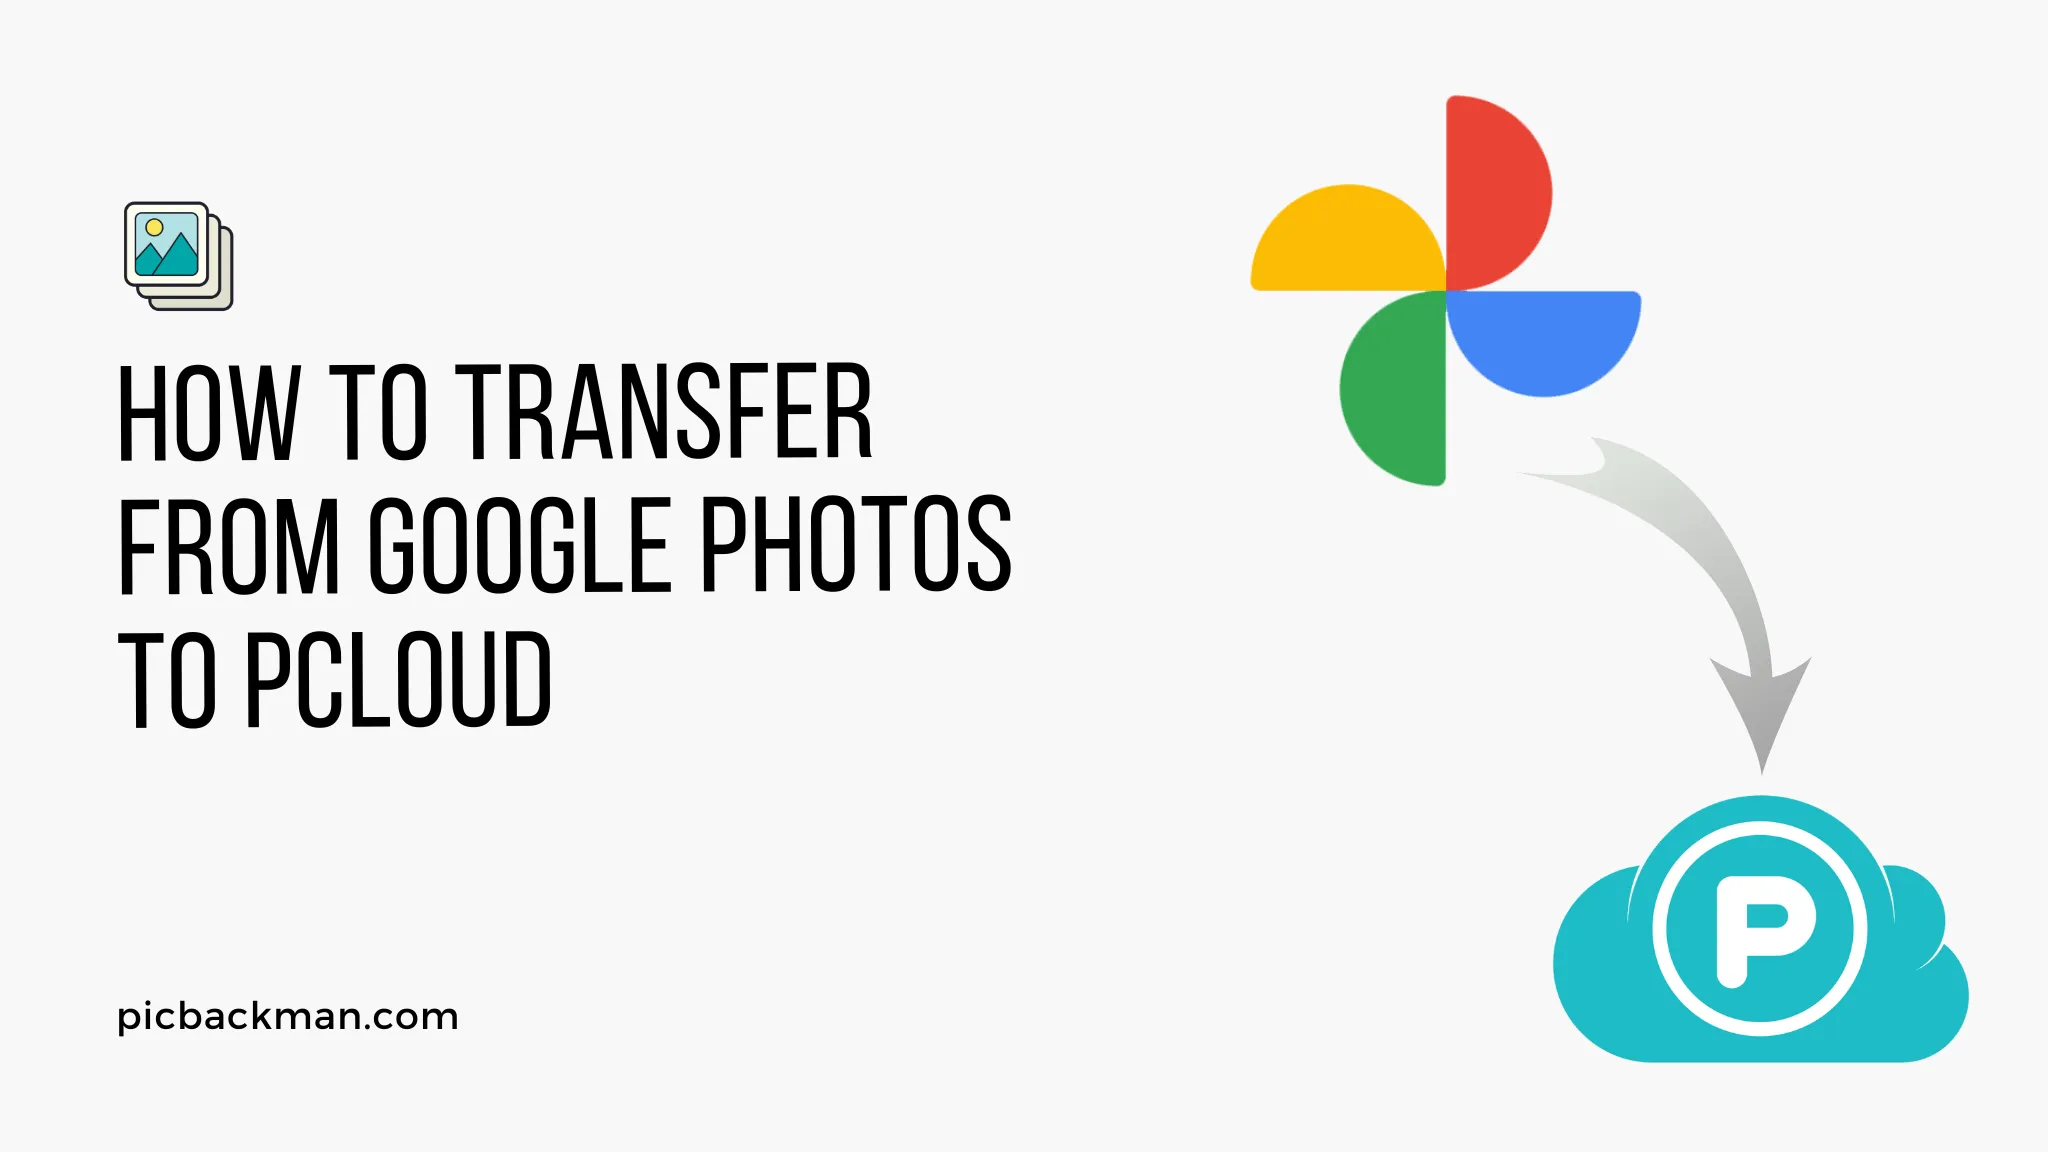 How to Transfer from Google Photos to pCloud